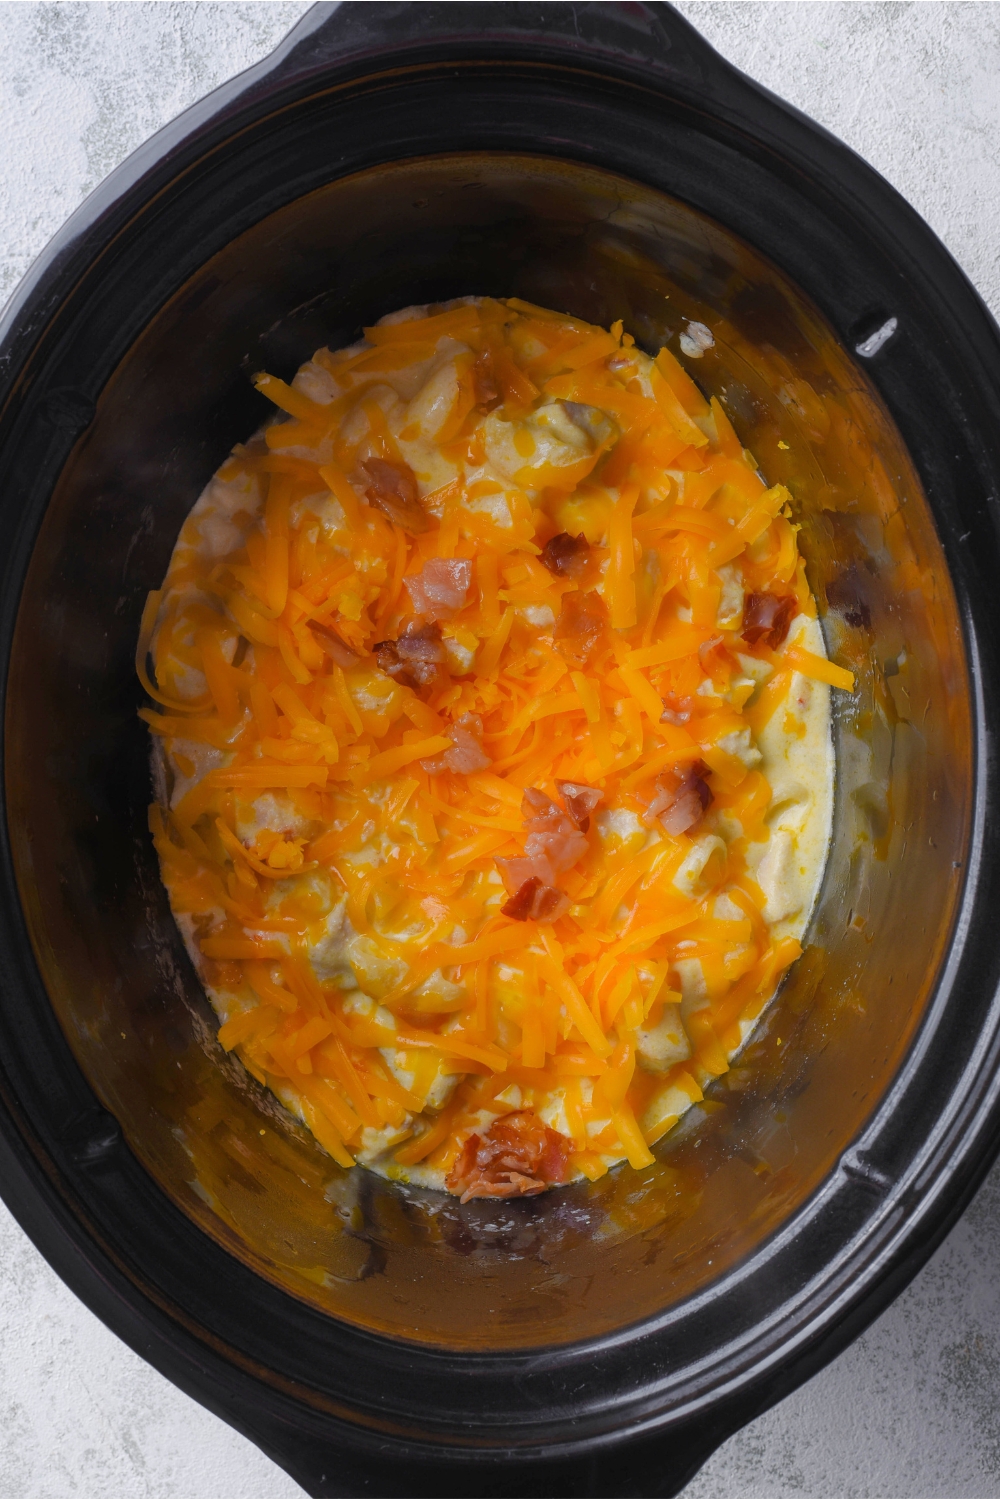 Shredded cheddar cheese and bacon on top of a creamy chicken casserole in a crock pot.